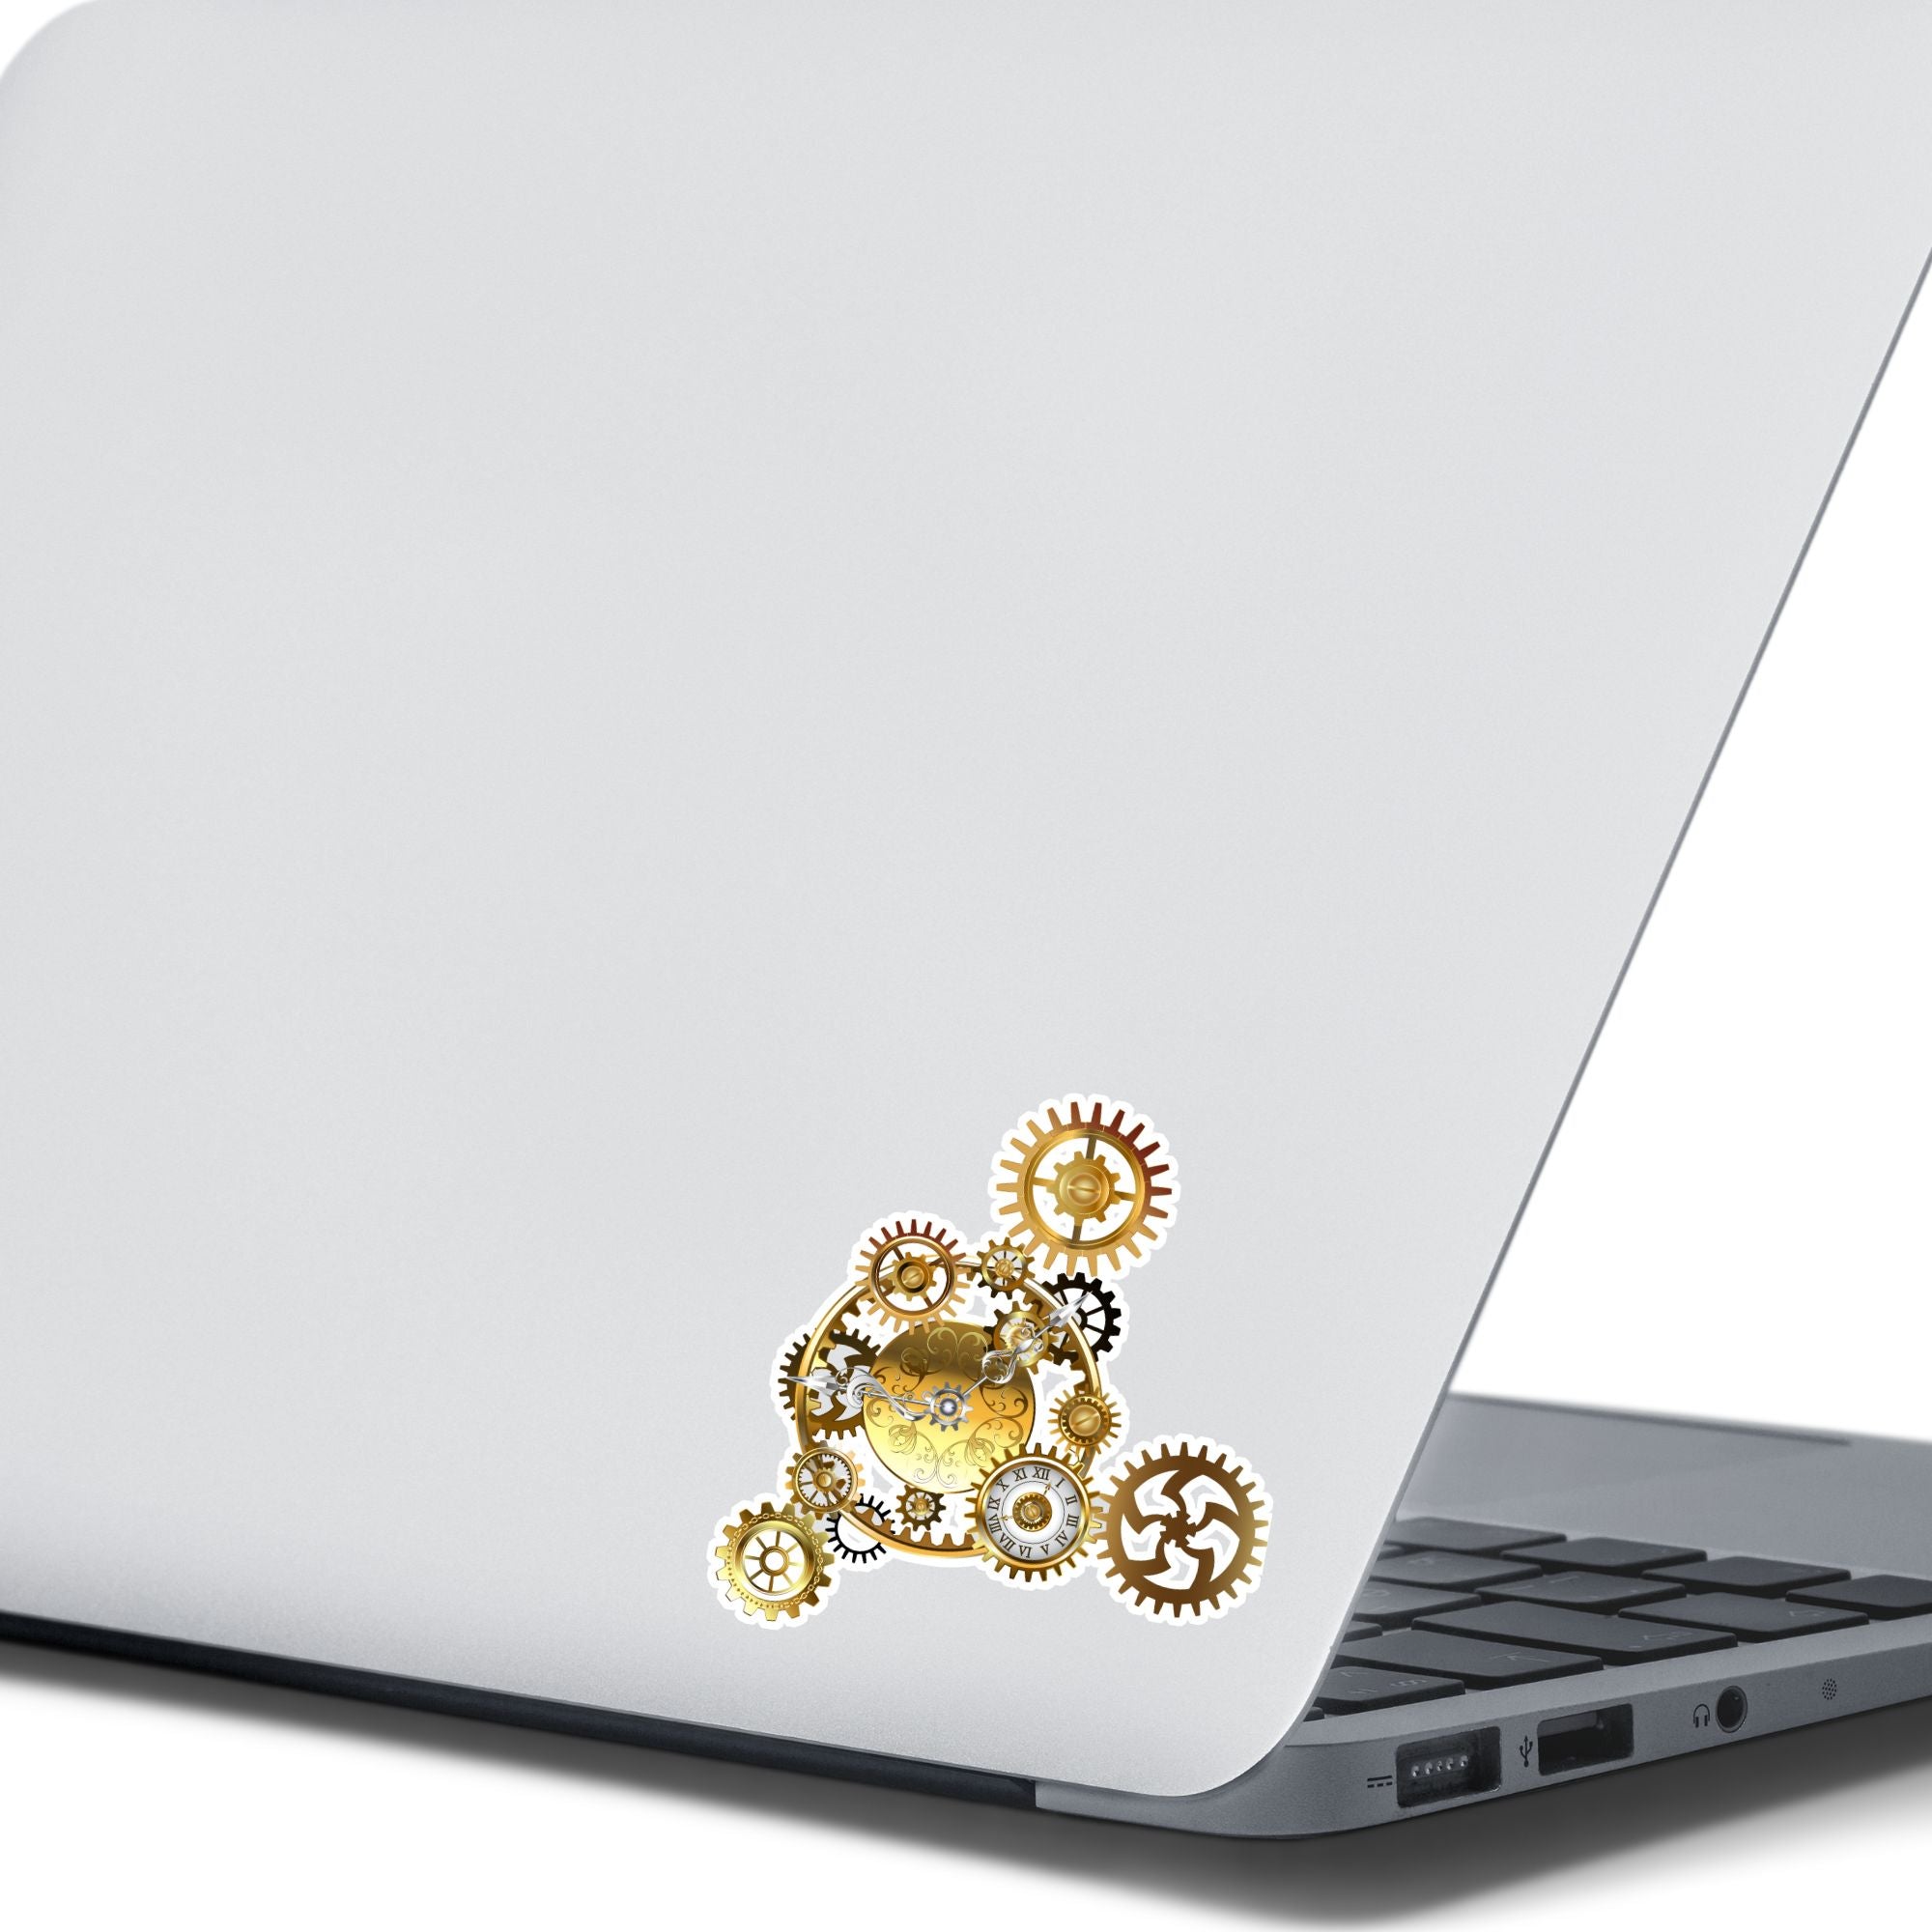 Nothing is more iconic for steampunk than gears and clocks. The steampunk gears individual die-cut sticker is a classic steampunk type image with gears and clocks. This image shows the steampunk gears sticker on the back of an open laptop.